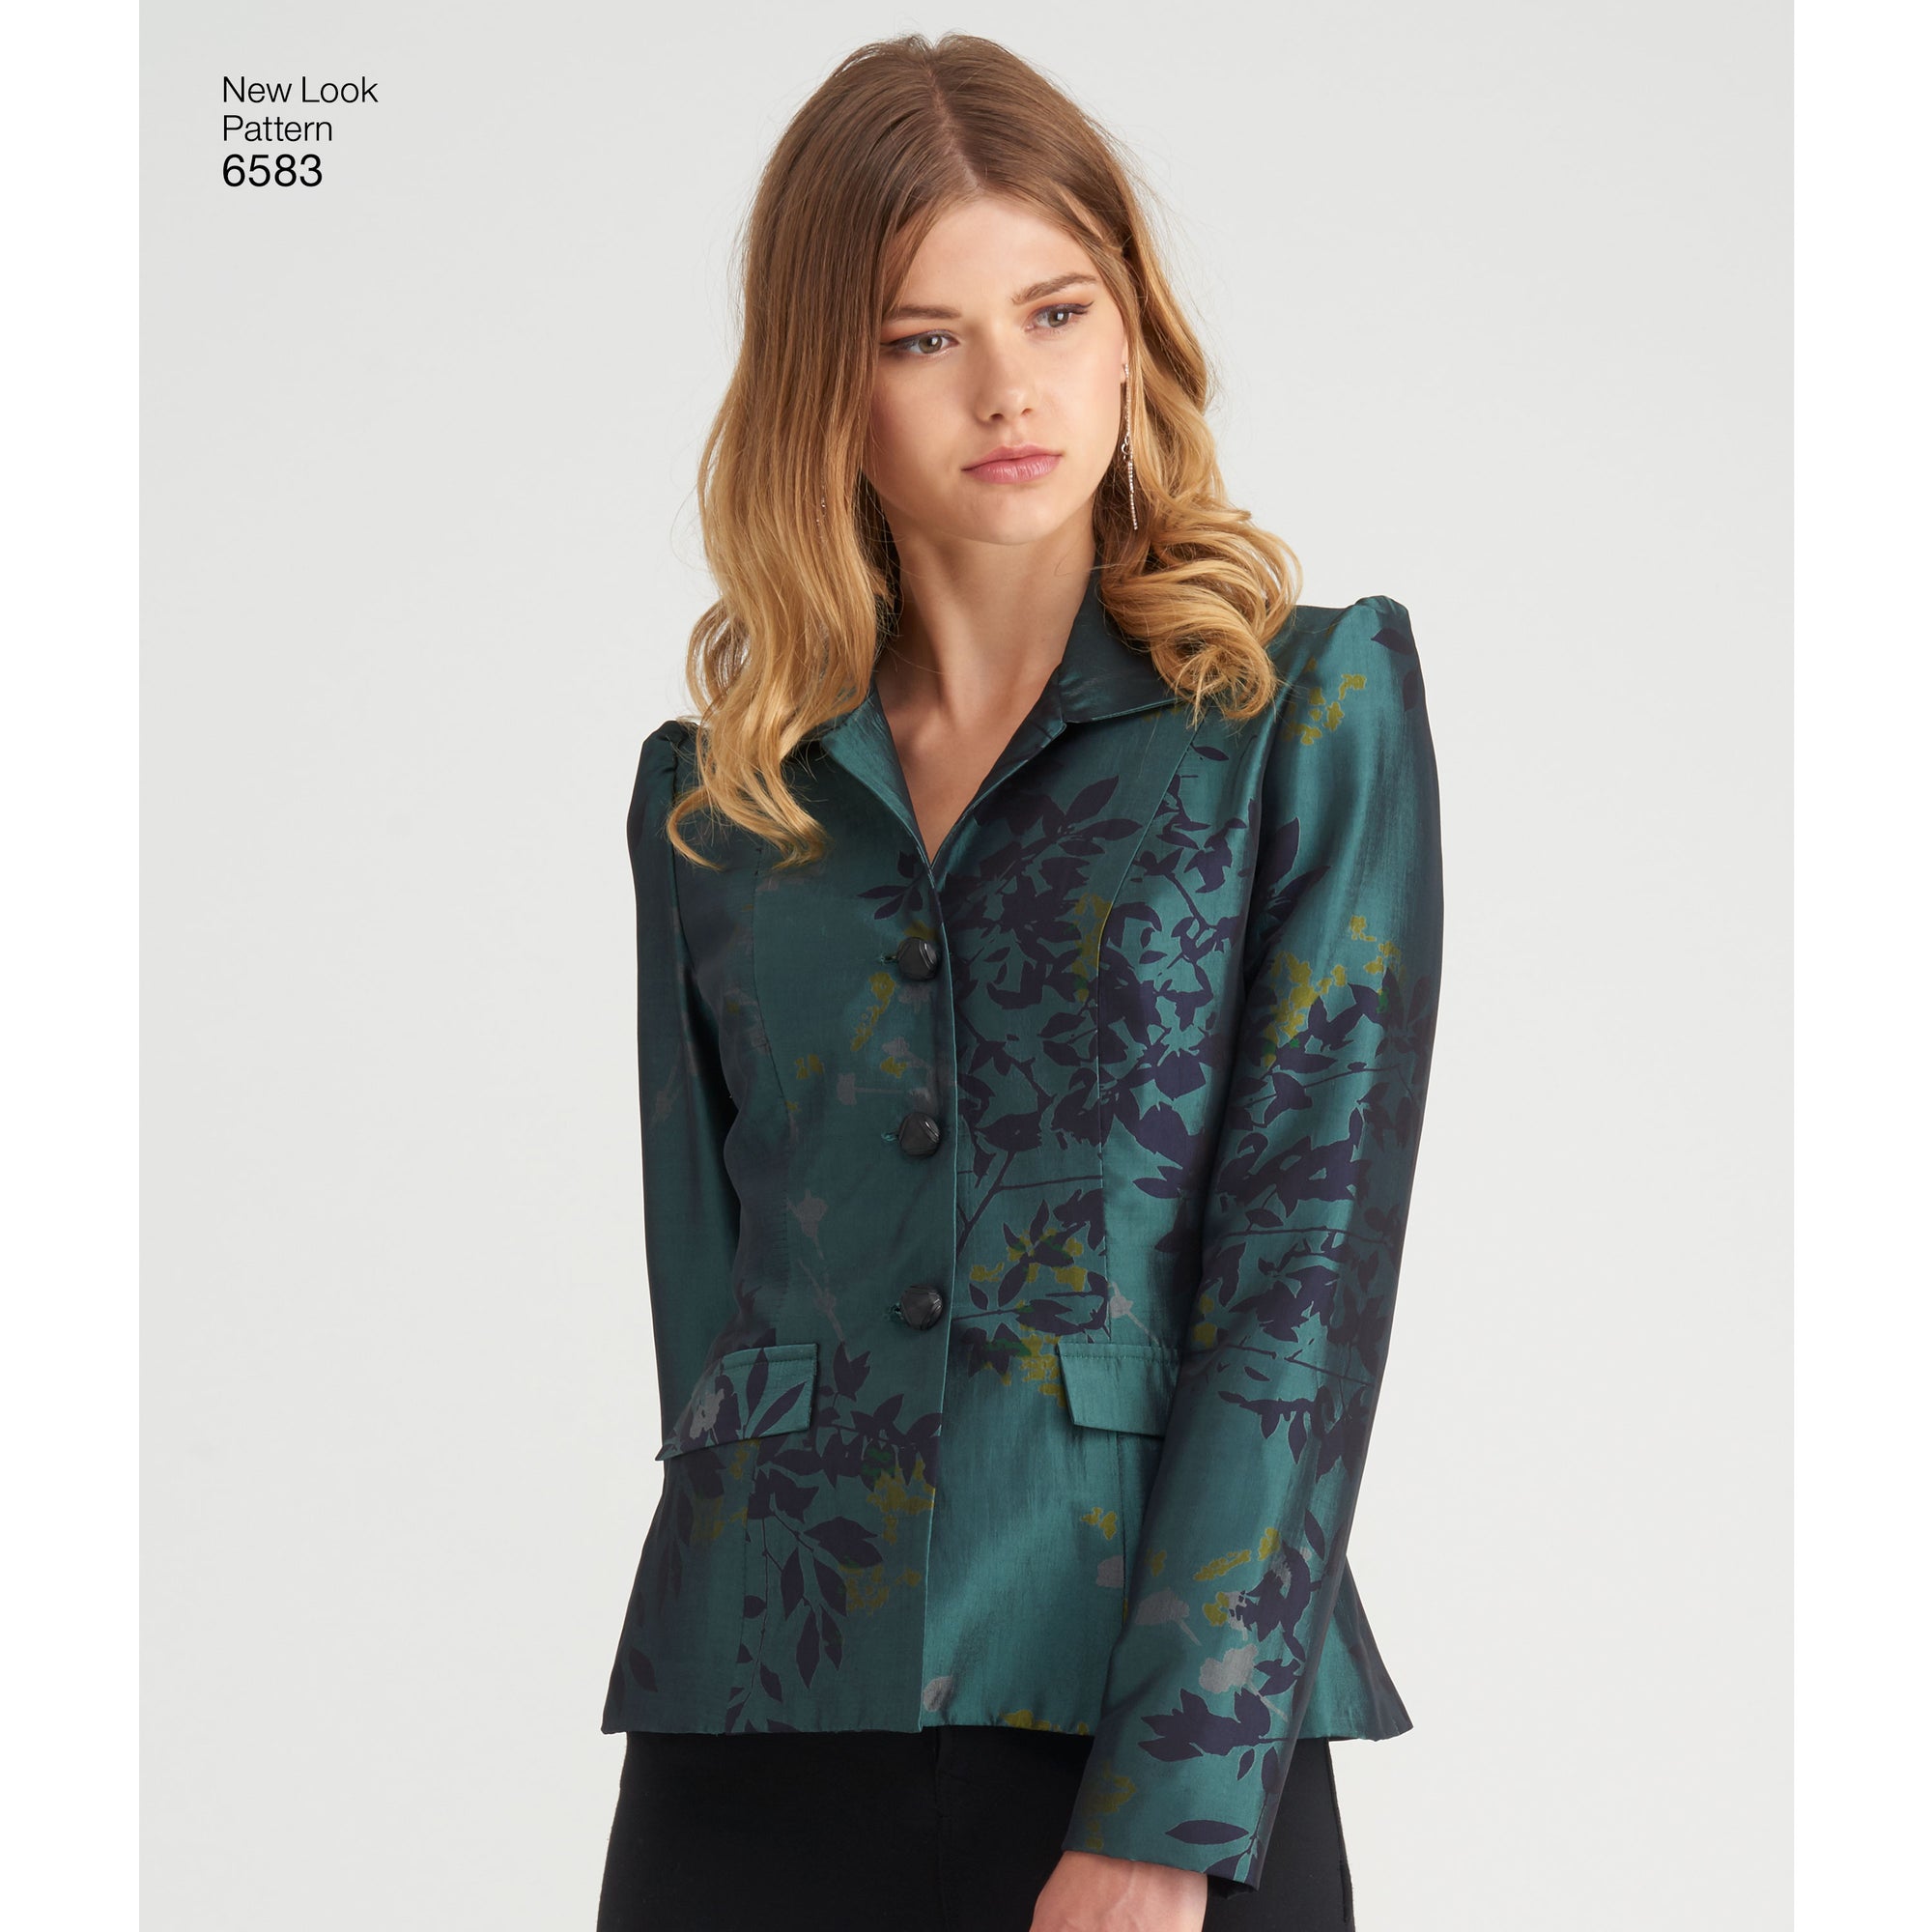 6583 New Look Pattern 6583 Misses' Lined Jacket